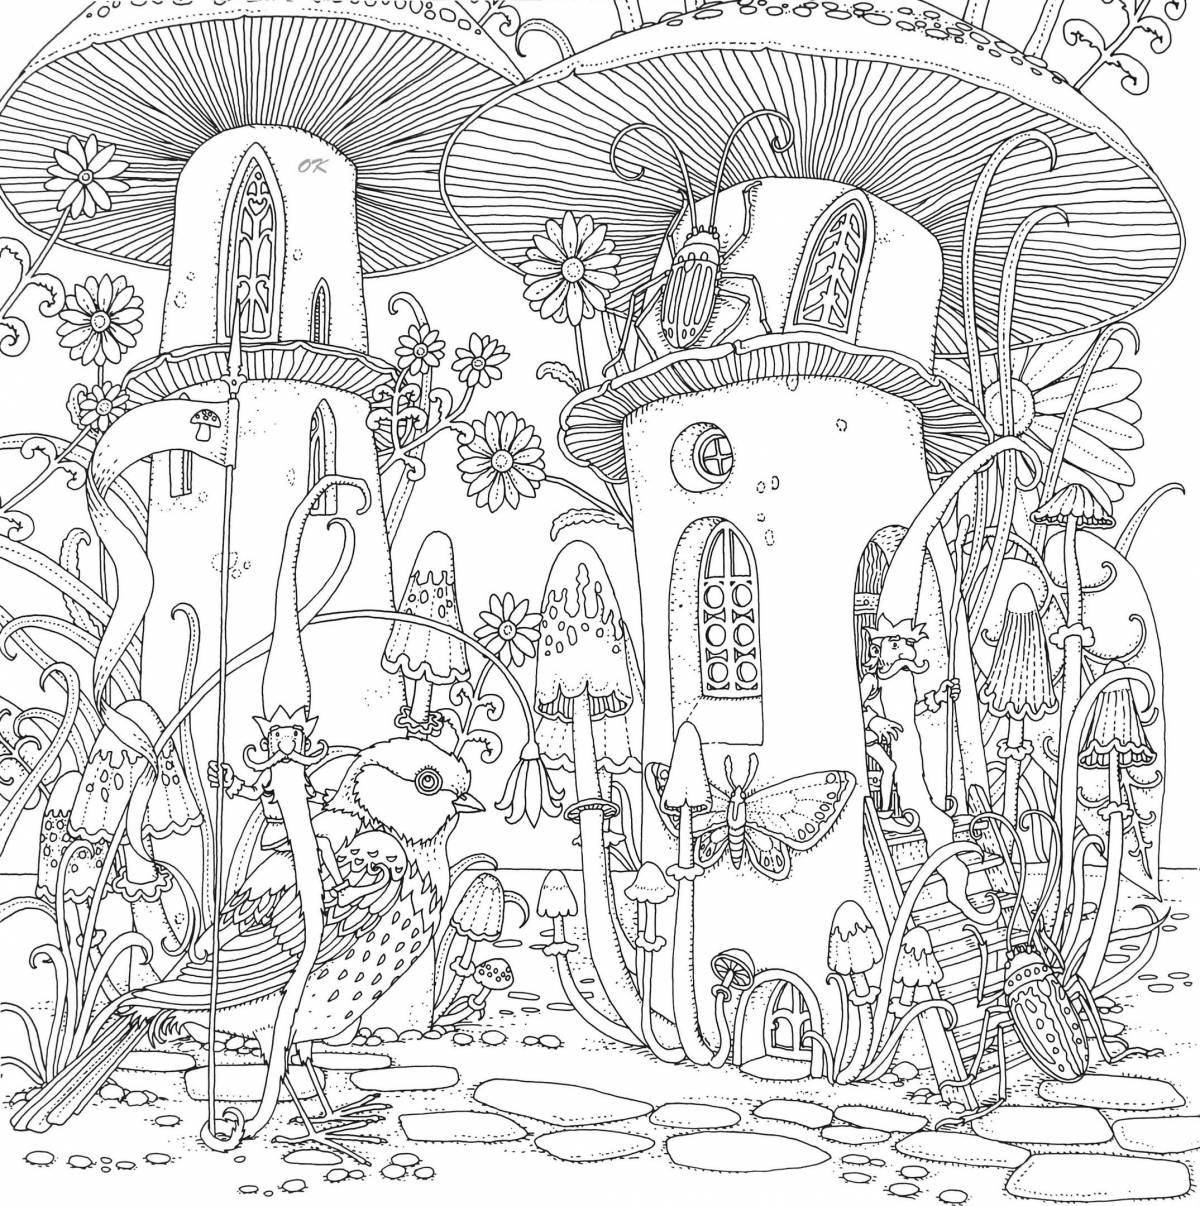 Radiant coloring page of hanna carlson's forest